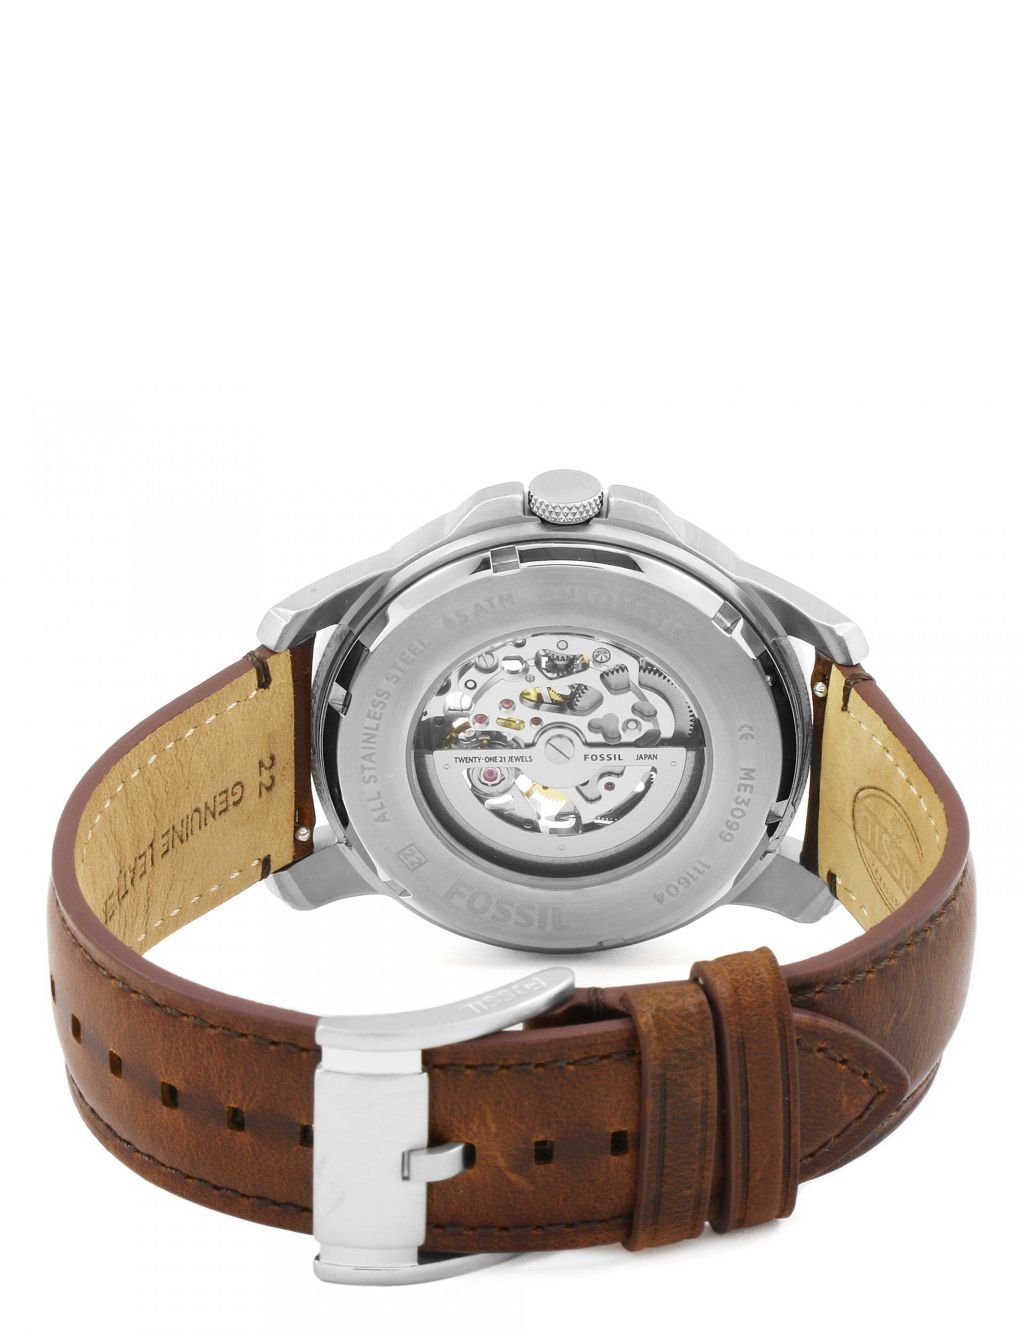 Fossil Grant Brown Leather Chronograph Automatic Watch image 5